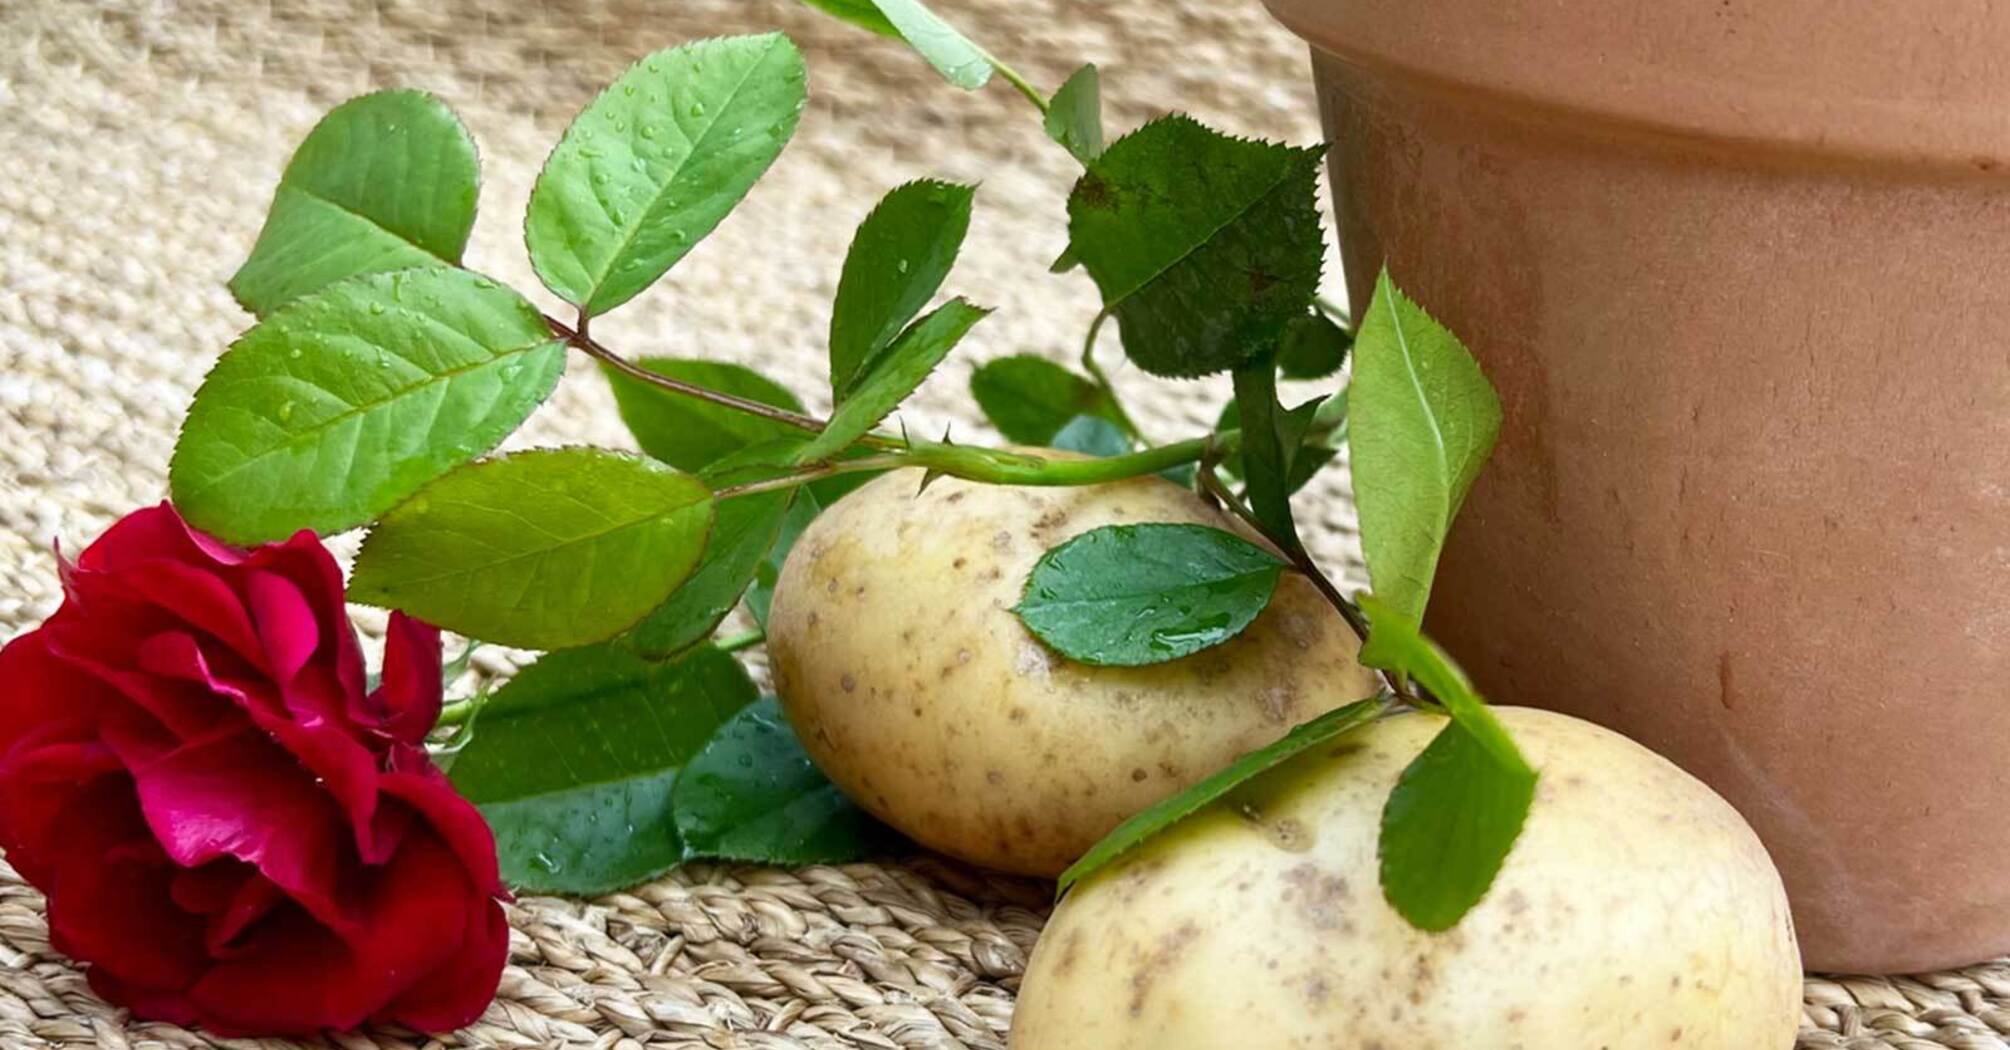 How to grow roses in potatoes